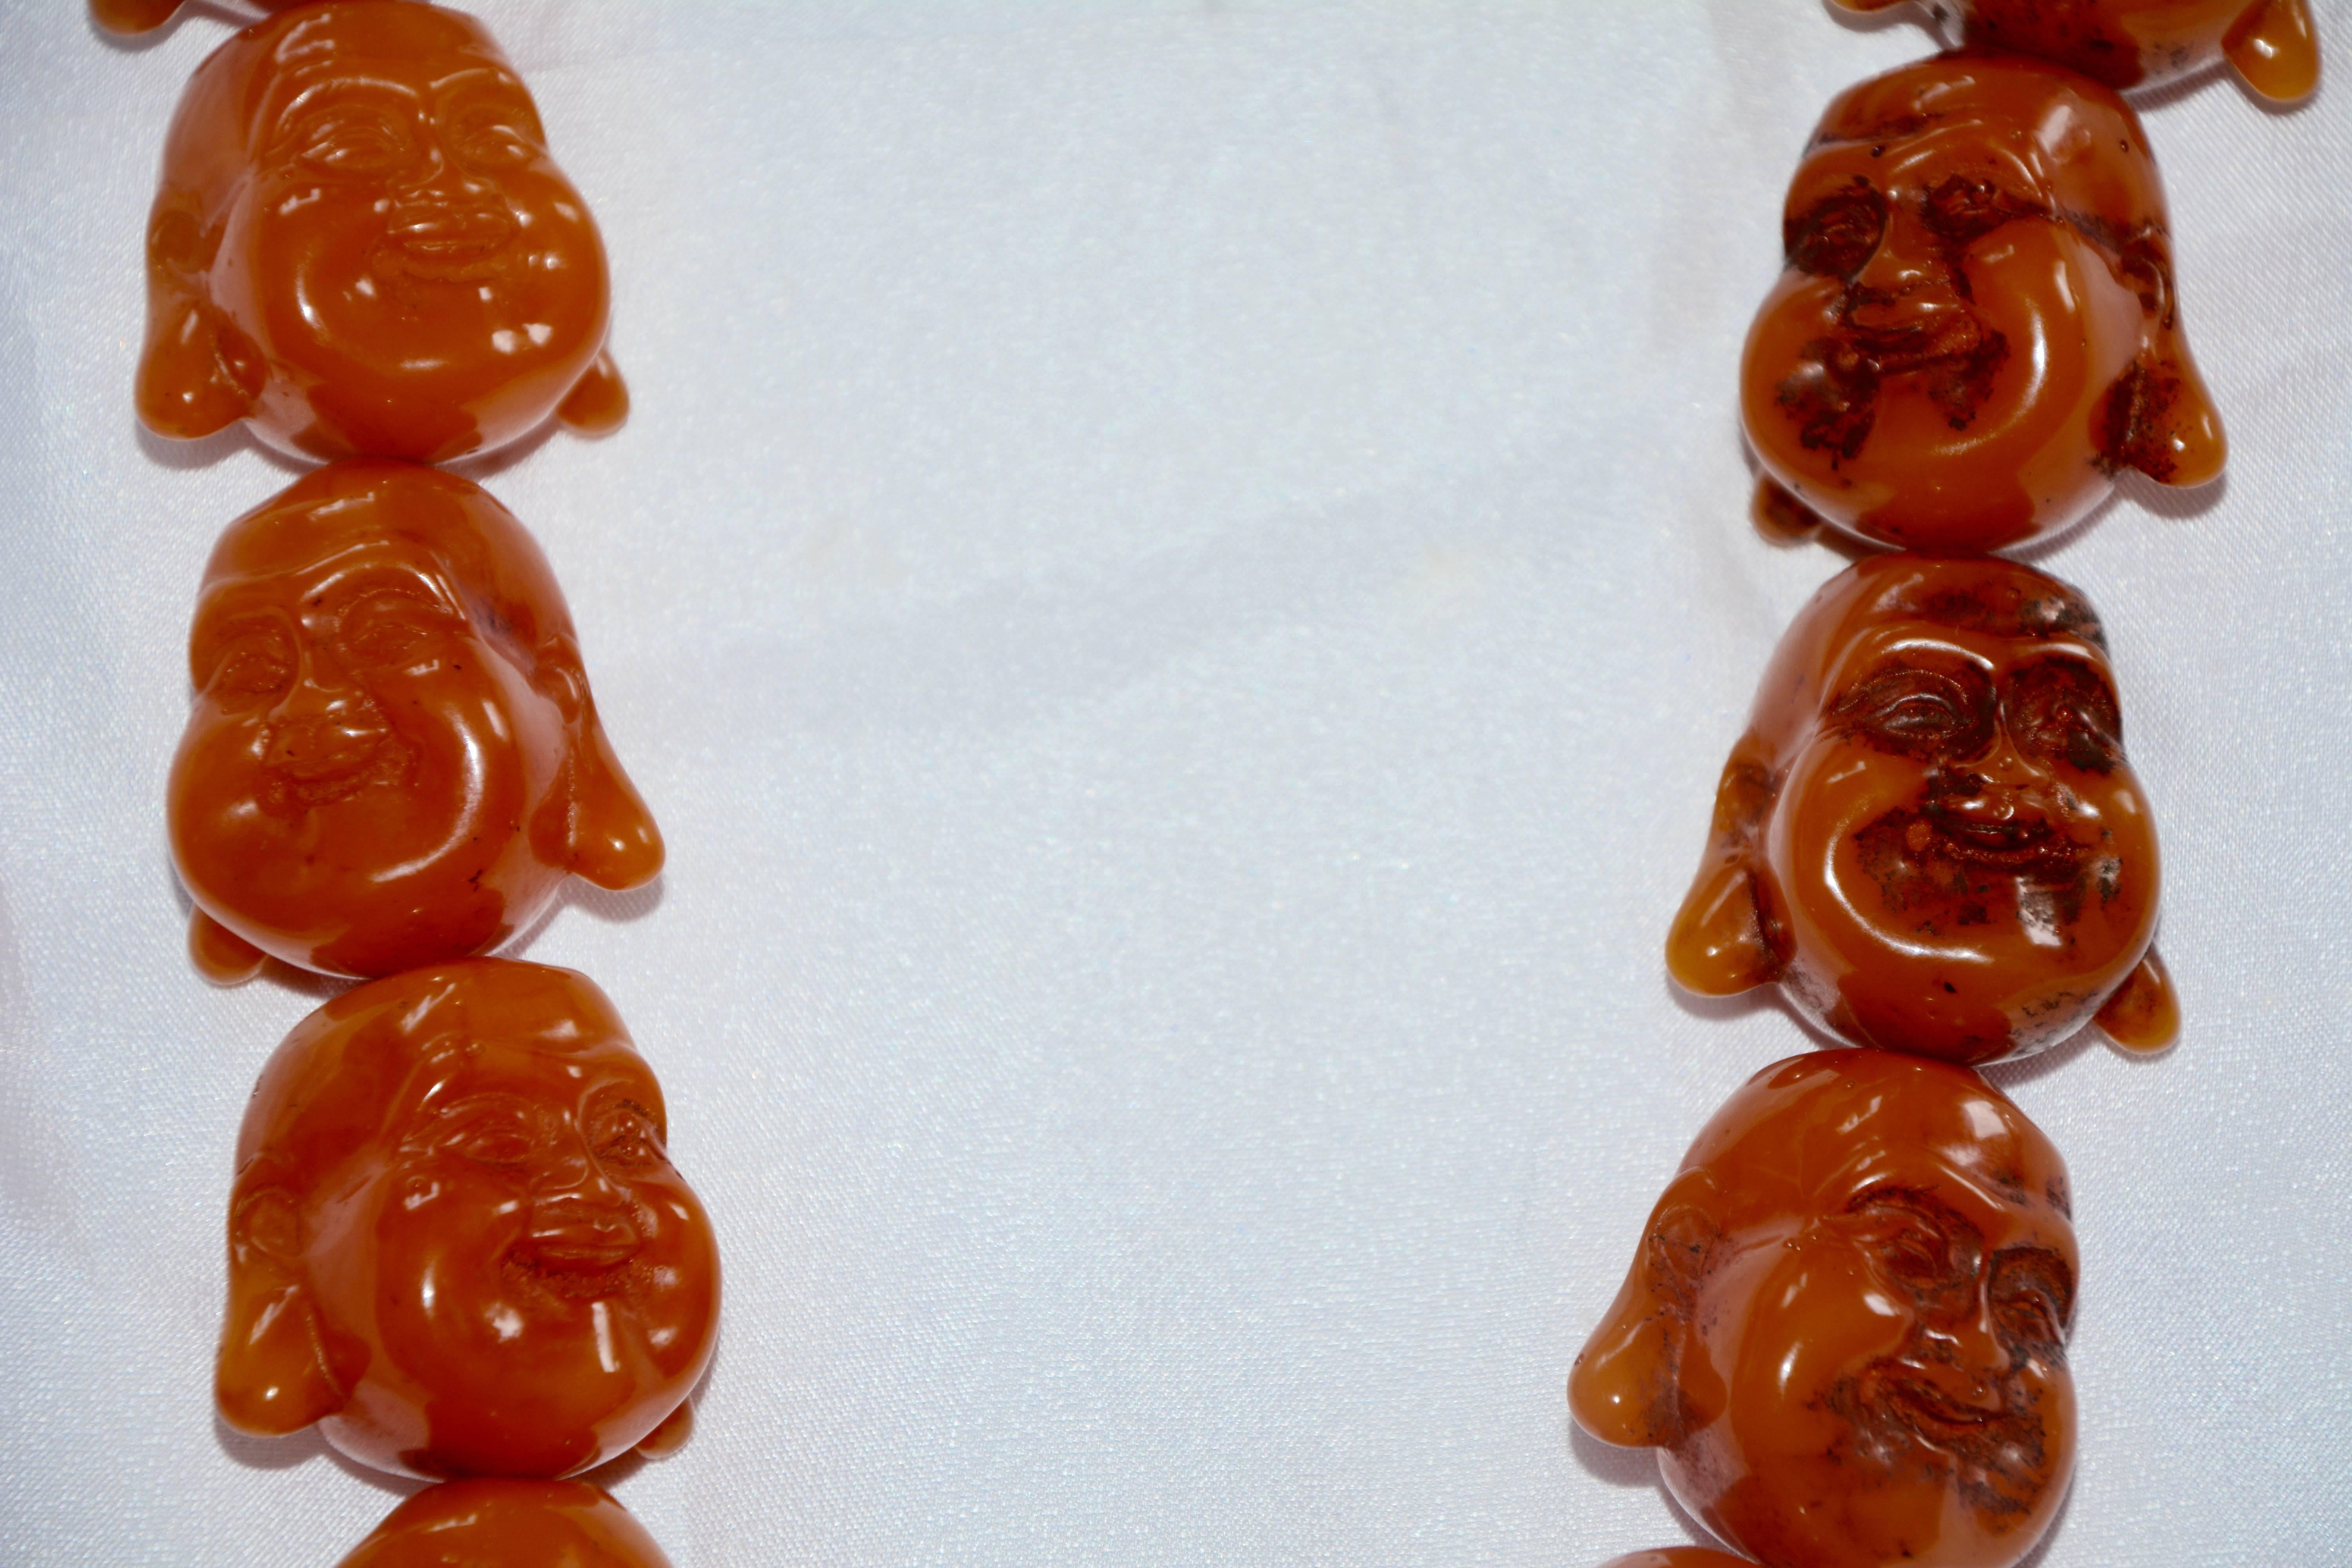 Carnelian Statement Necklace with Smiling Buddha Heads In Good Condition For Sale In Cookeville, TN